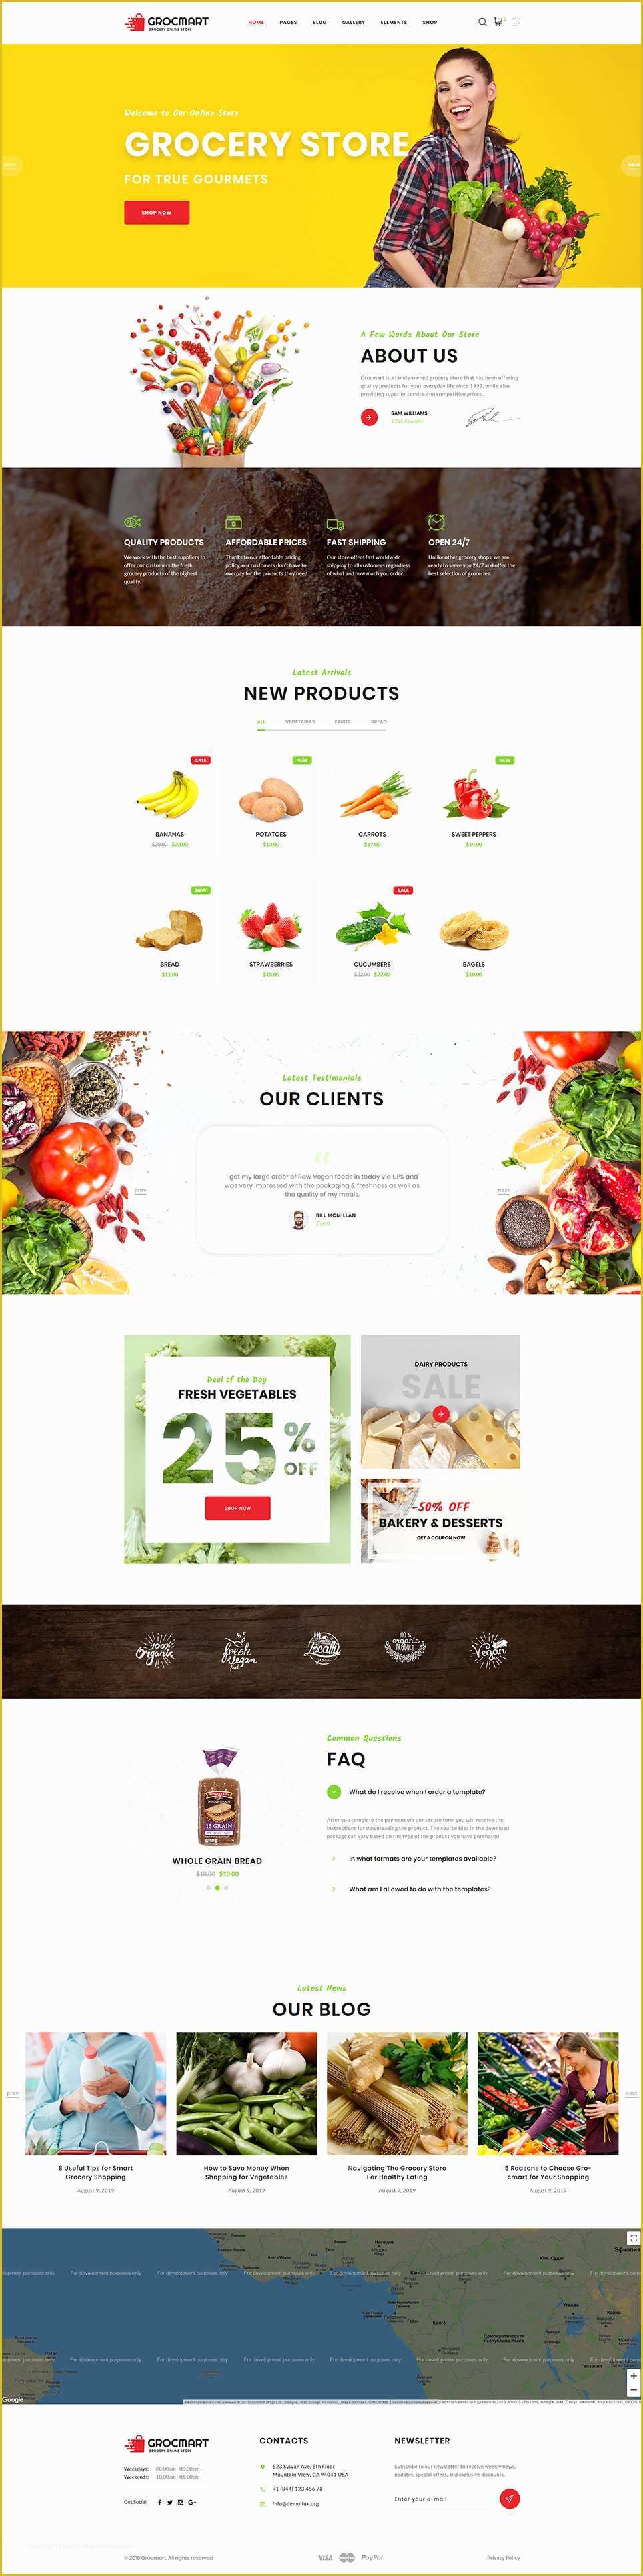 Free Online Grocery Website Template Of Grocery Store Responsive Website Template